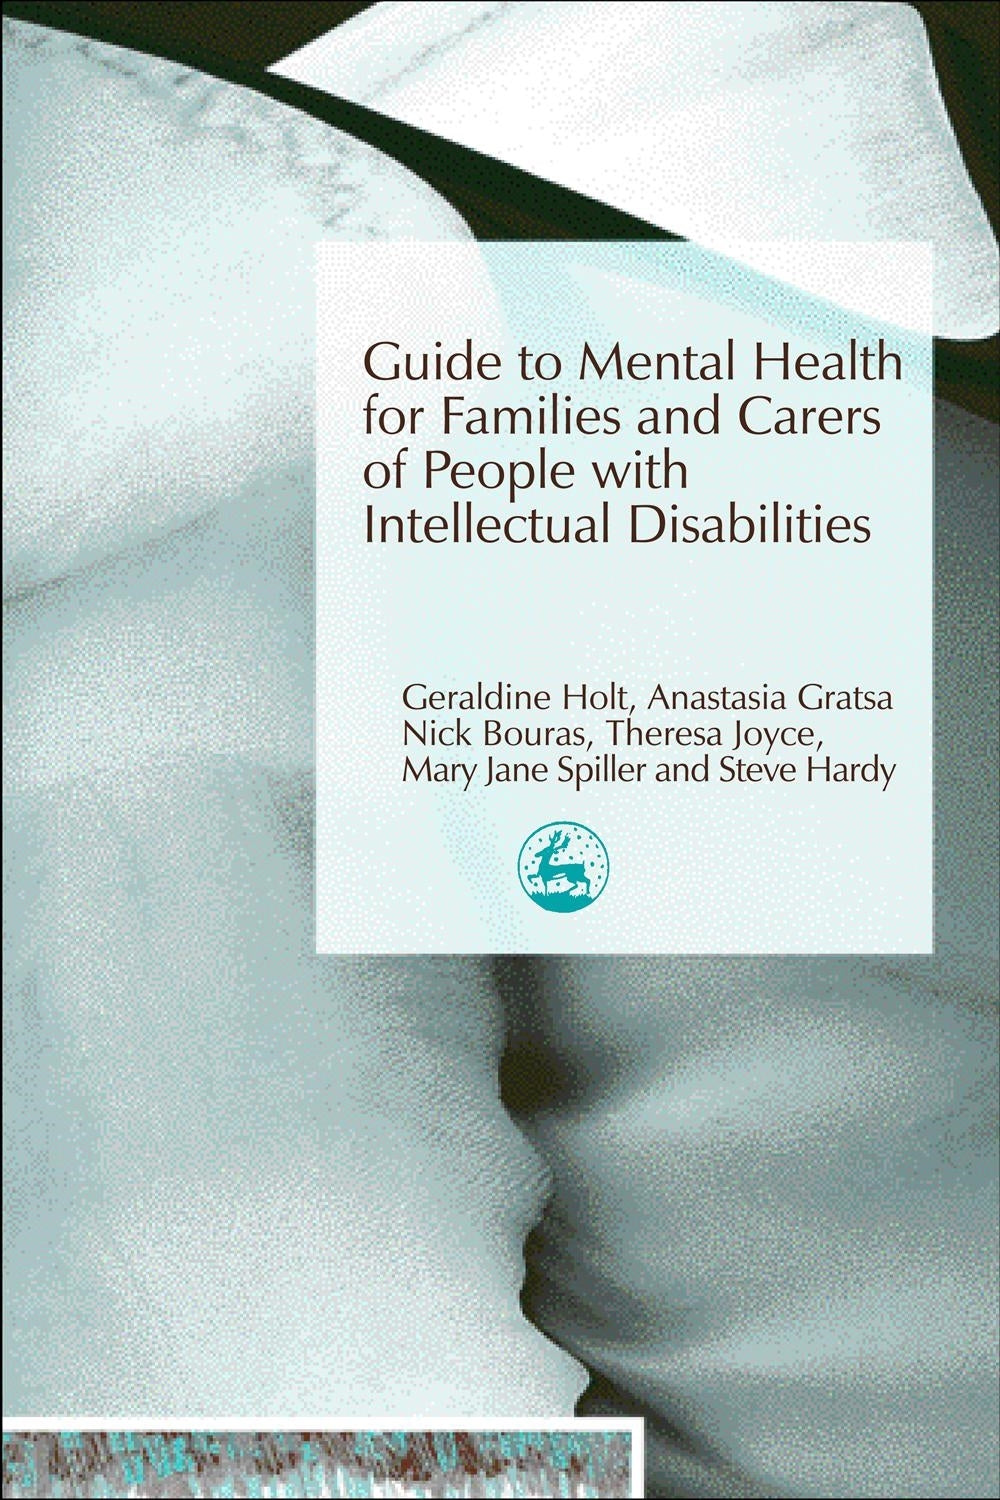 Guide to Mental Health for Families and Carers of People with Intellectual Disabilities by Nick Bouras, Geraldine Holt, Anastasia Gratsa